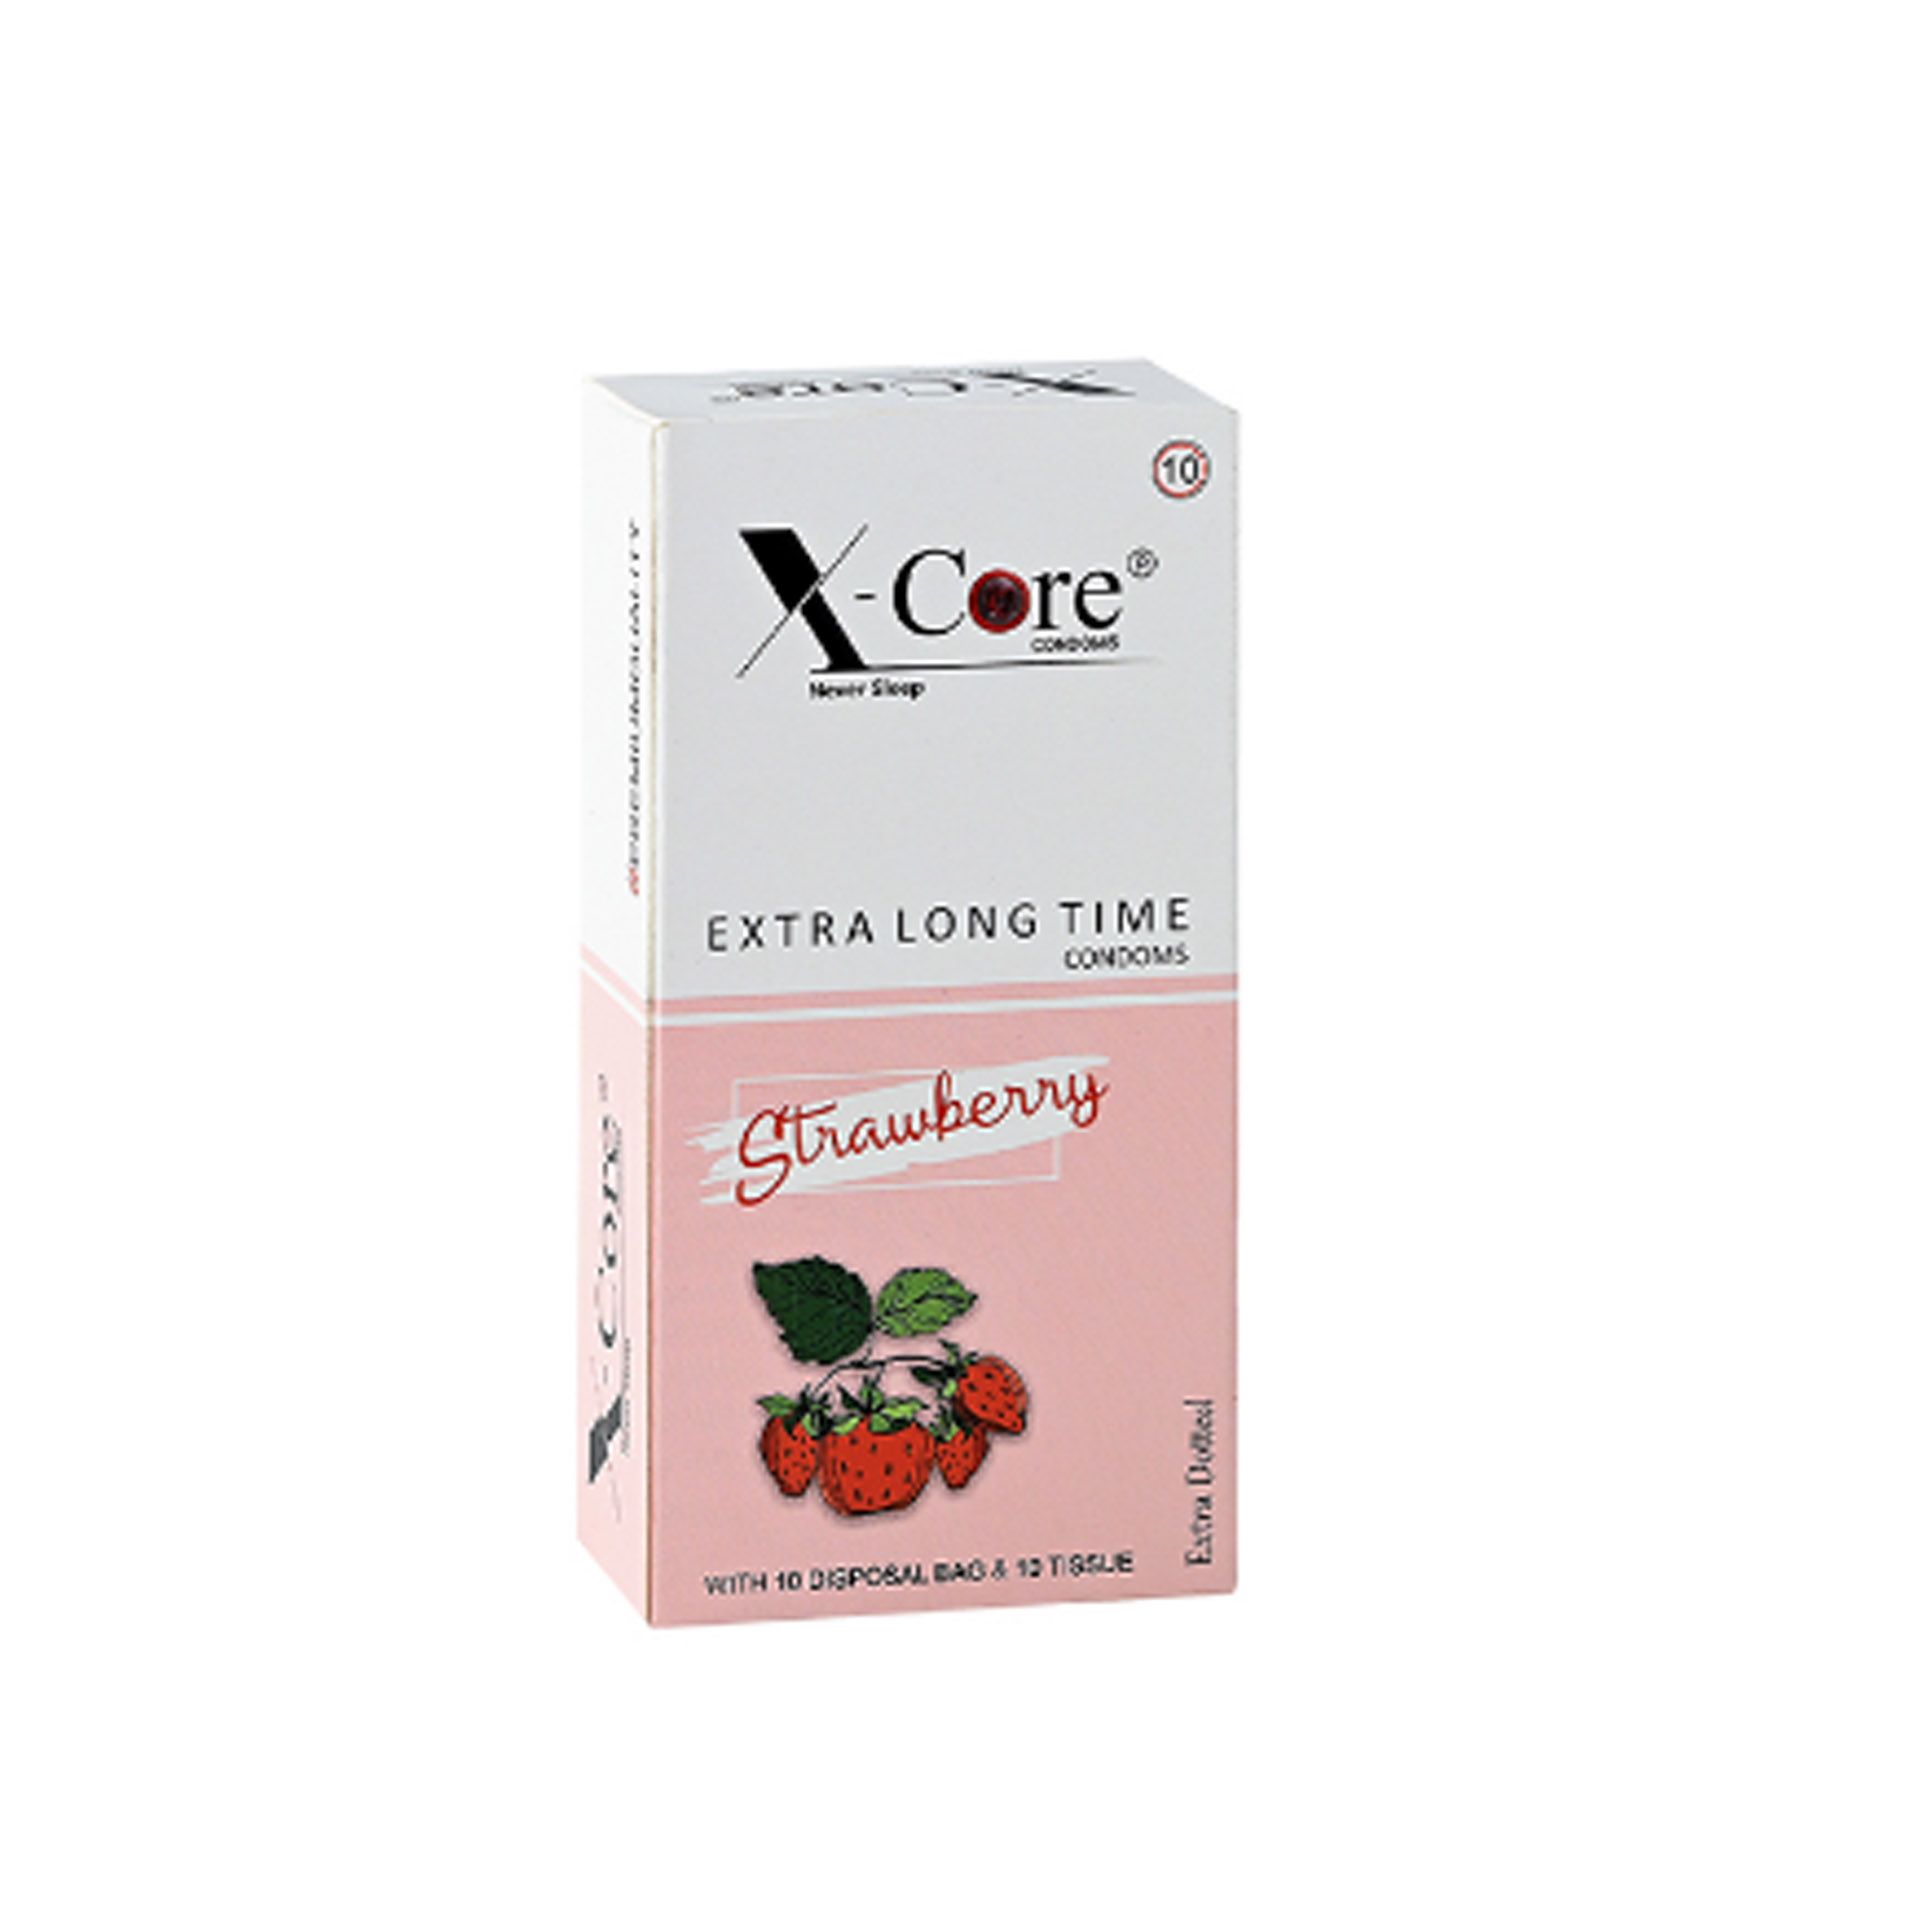 X-Core Extra Time Long Lasting Dotted Condom (Strawberry Flavoured) - 10Pcs Pack(India)  